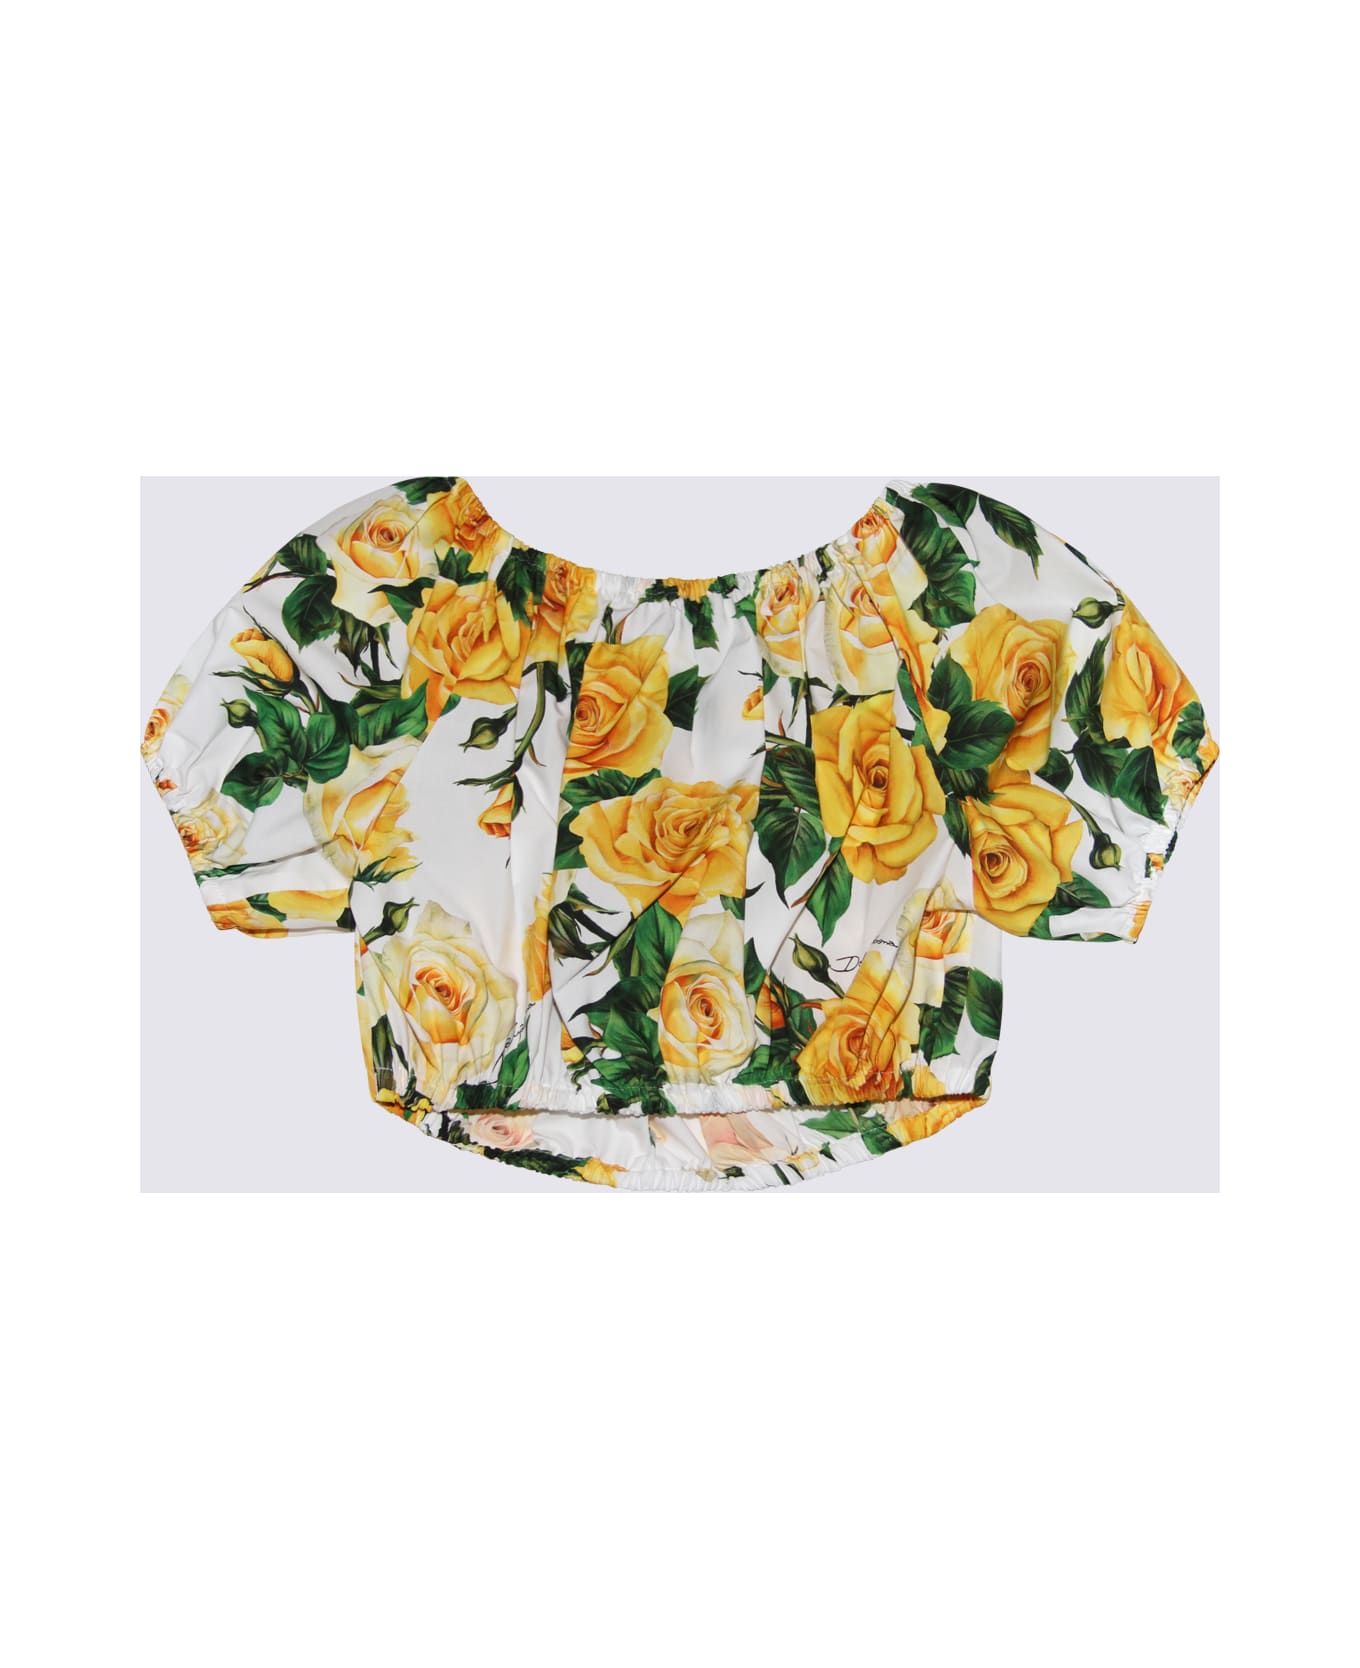 Dolce & Gabbana White, Yellow And Green Cotton Top - ROSE GIALLE F.DO BIANCO